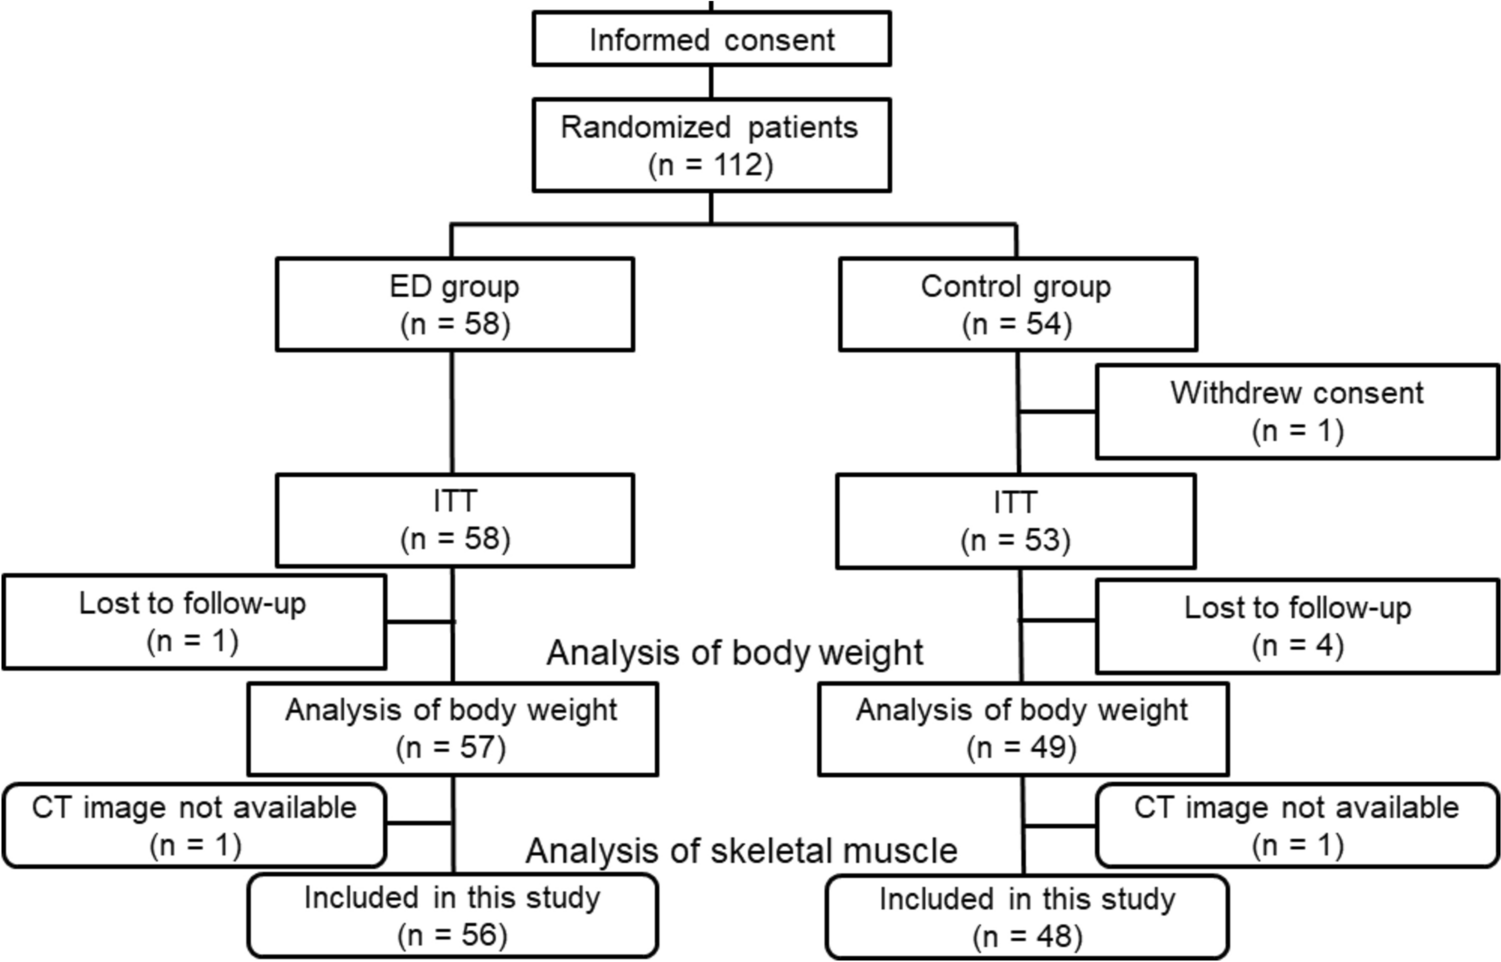 Effects of postoperative oral elemental nutritional supplement on skeletal muscle loss after gastrectomy for gastric cancer